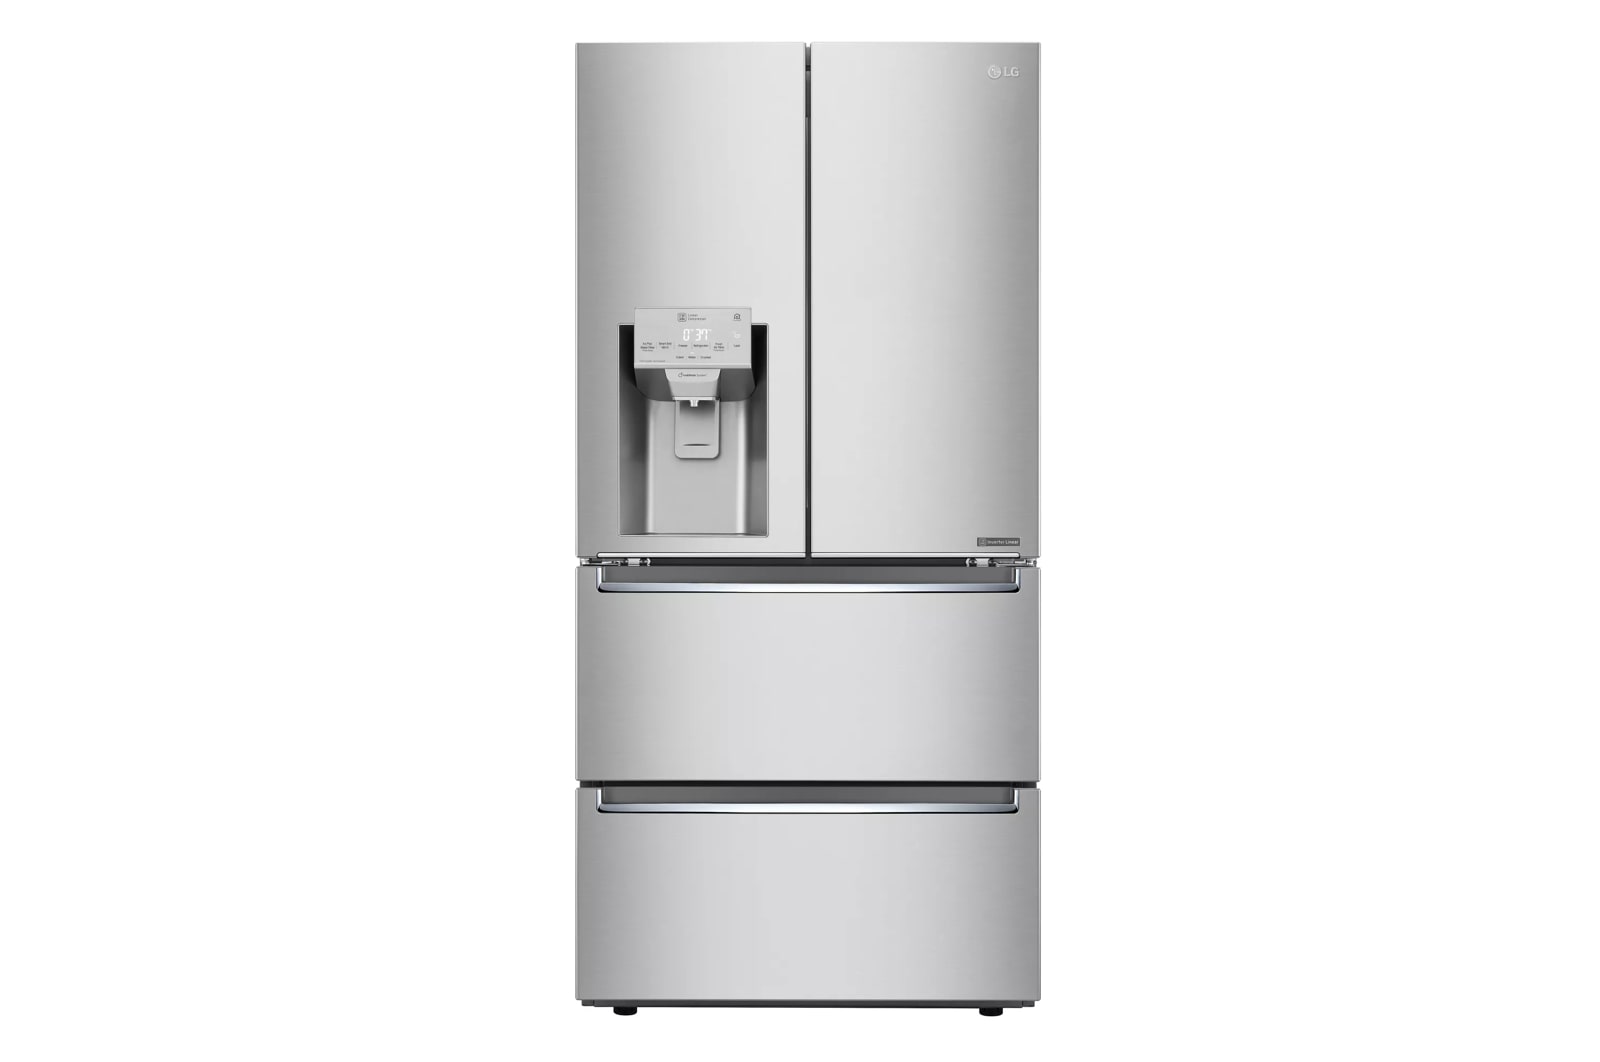 Lg 18.3 cu. ft. Counter-Depth French Door Refrigerator with Tall Ice and Water Dispenser